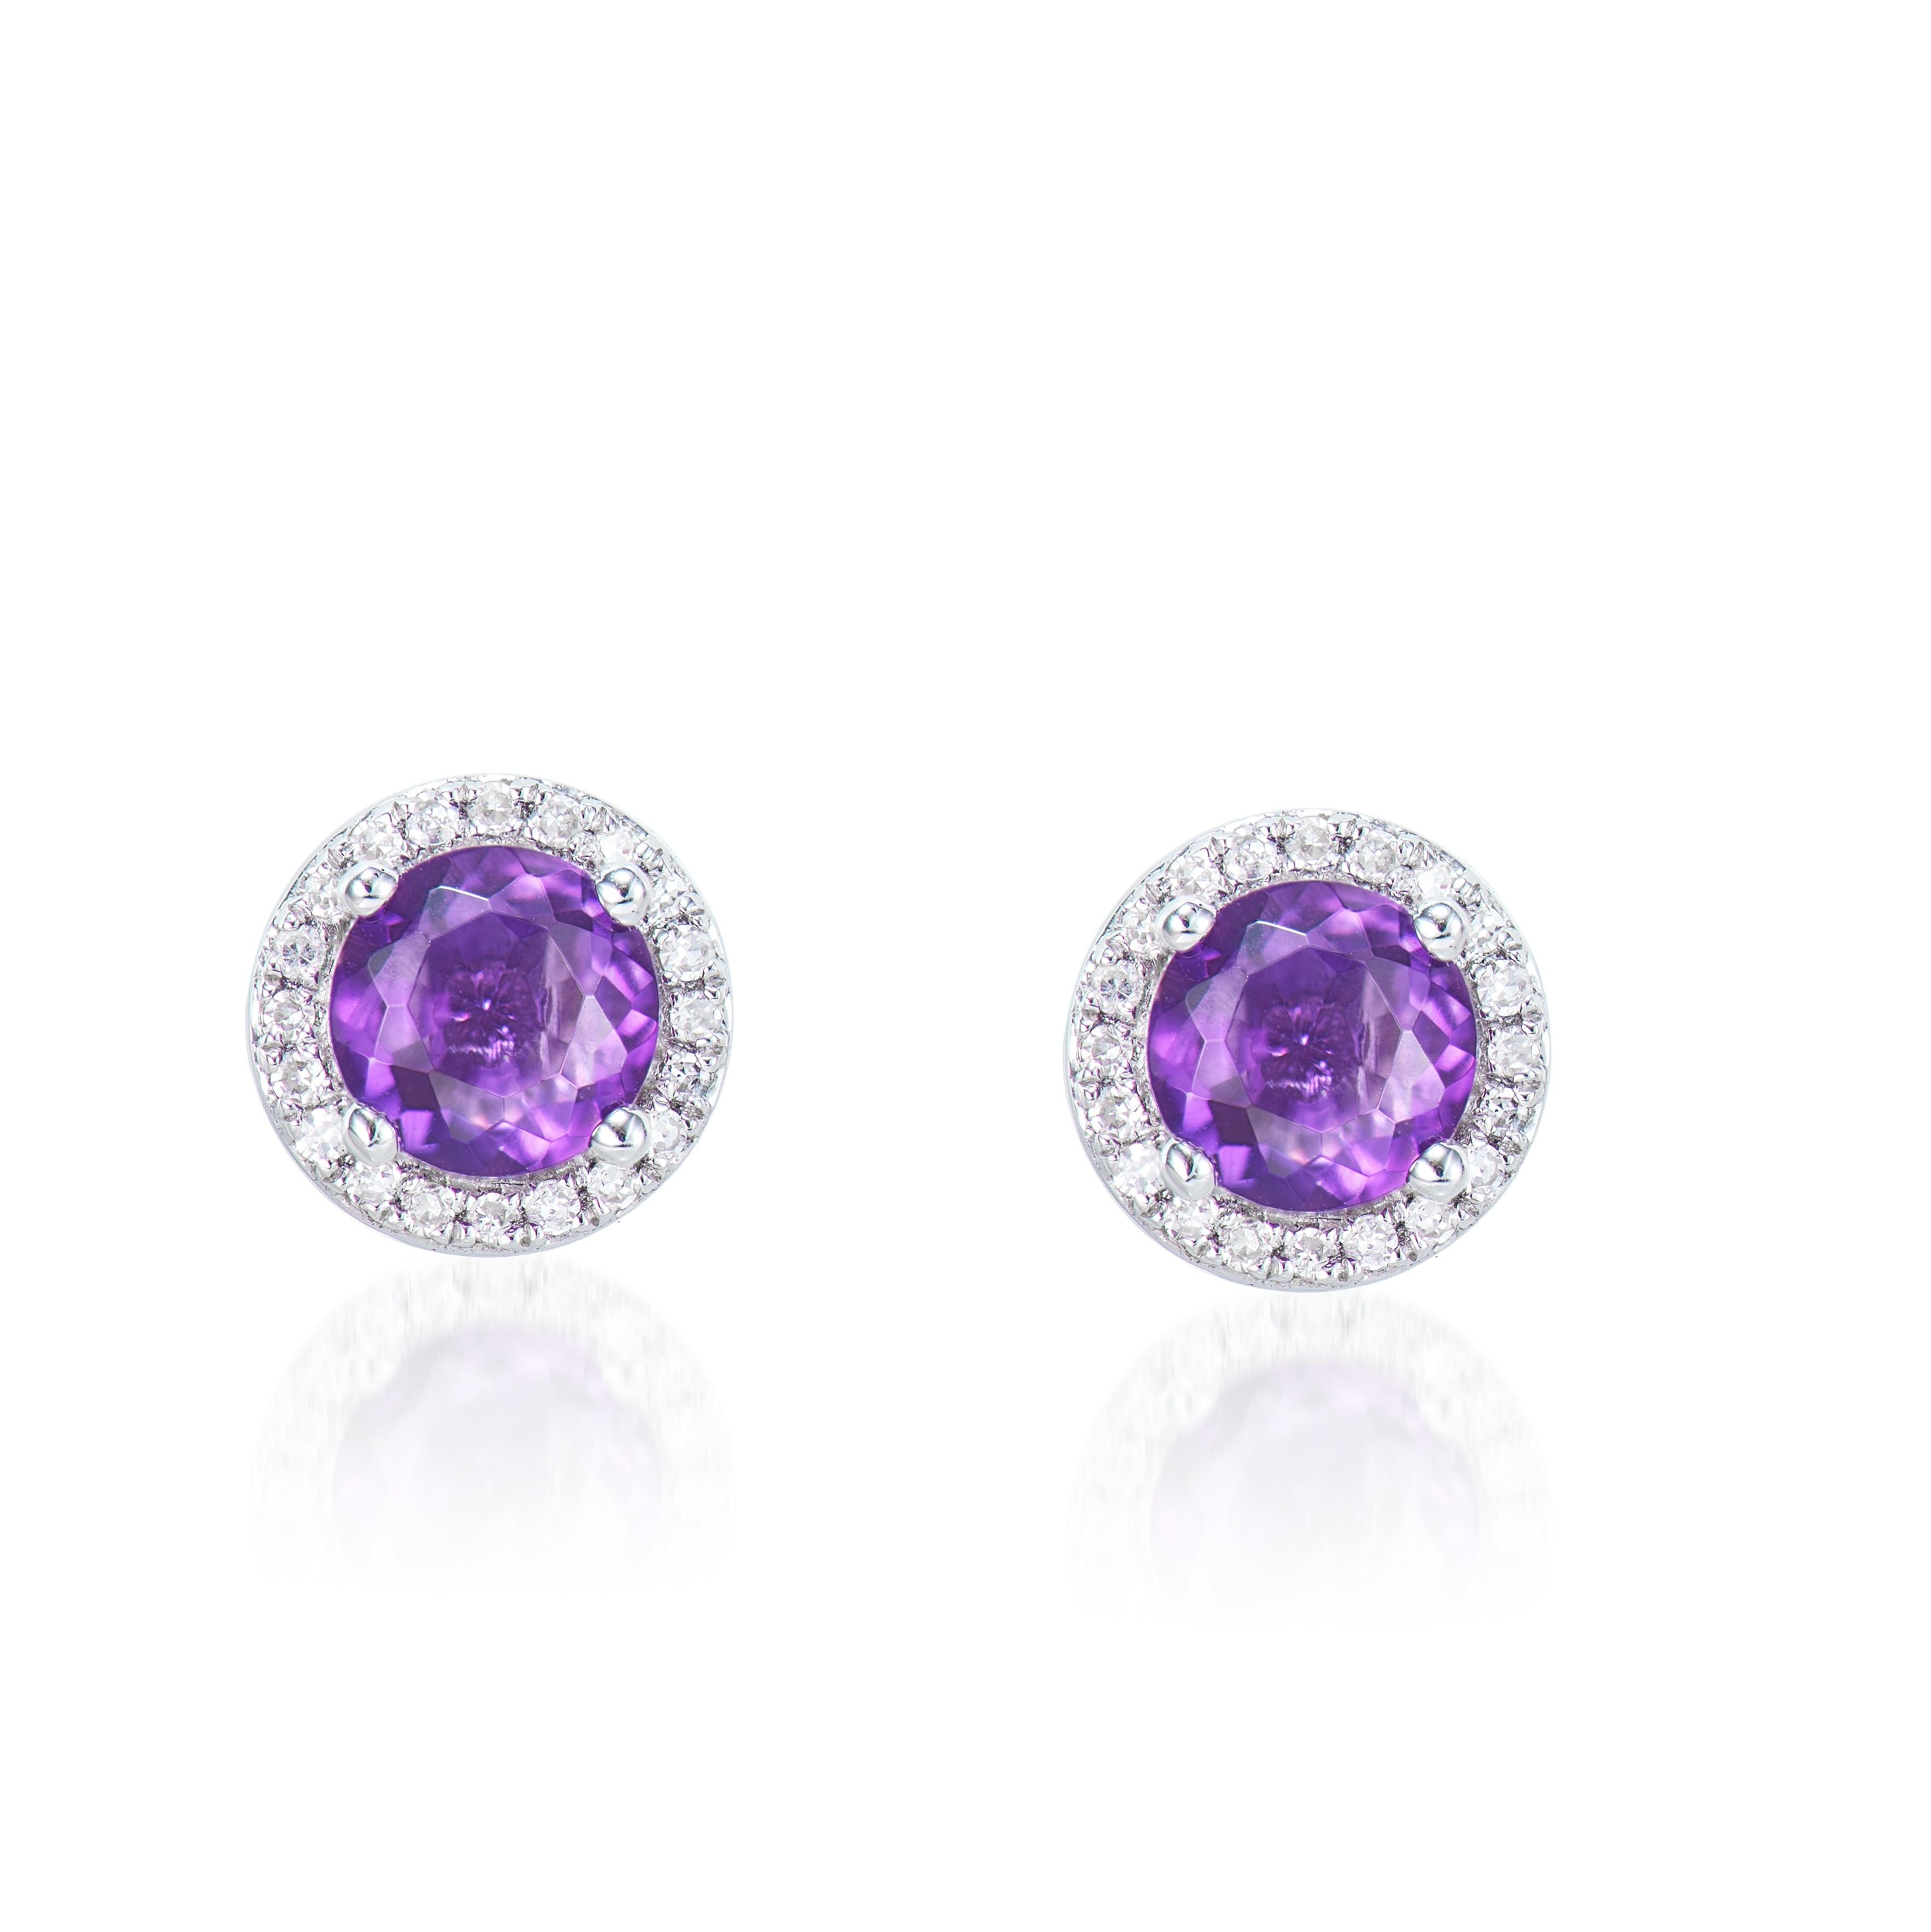 Contemporary 0.80 Carat Amethyst Stud Earrings in 18Karat White Gold with White Diamond. For Sale